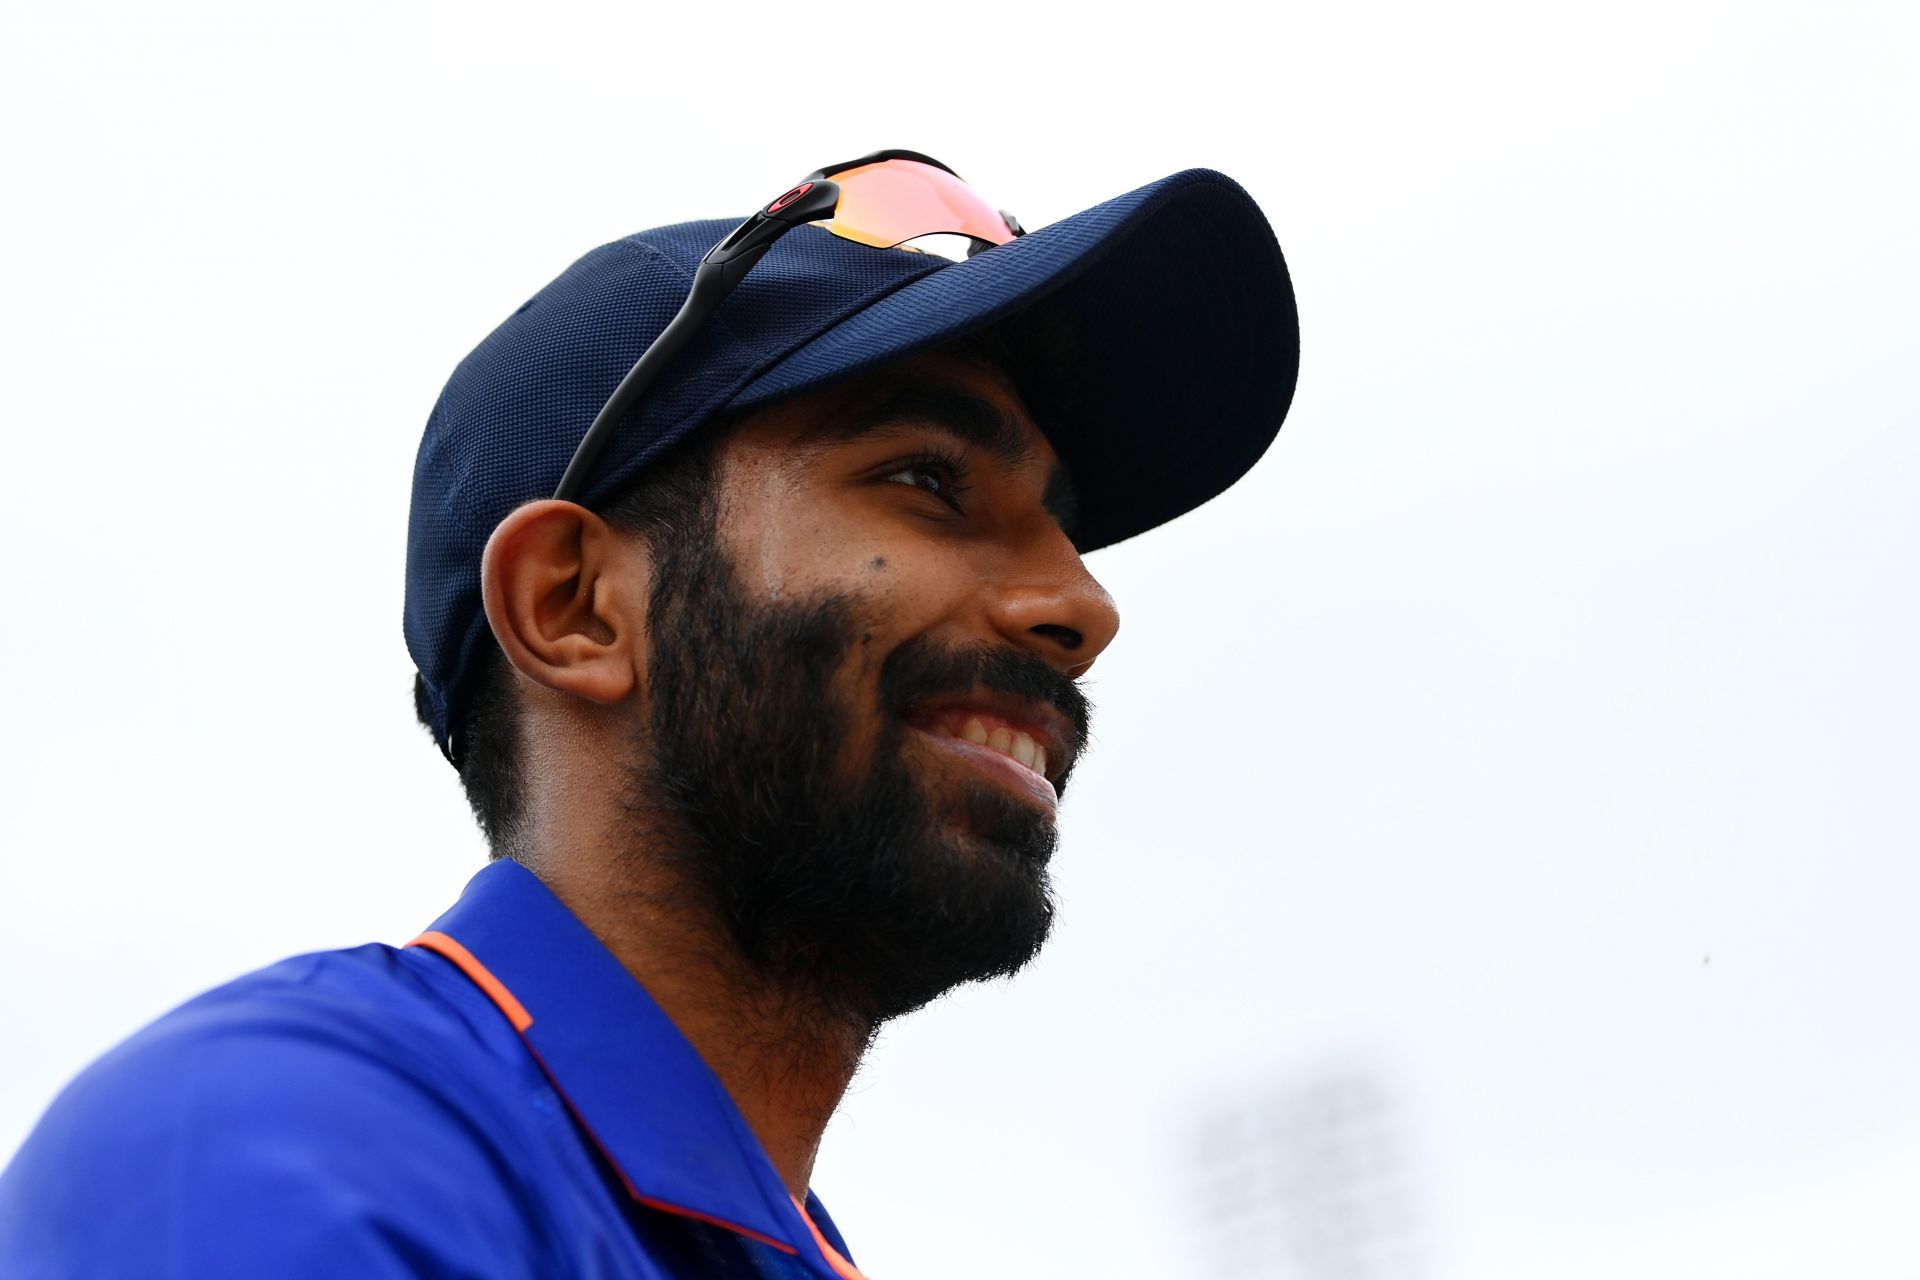 Jasprit Bumrah returned career-best figures in the ODI against England on Tuesday